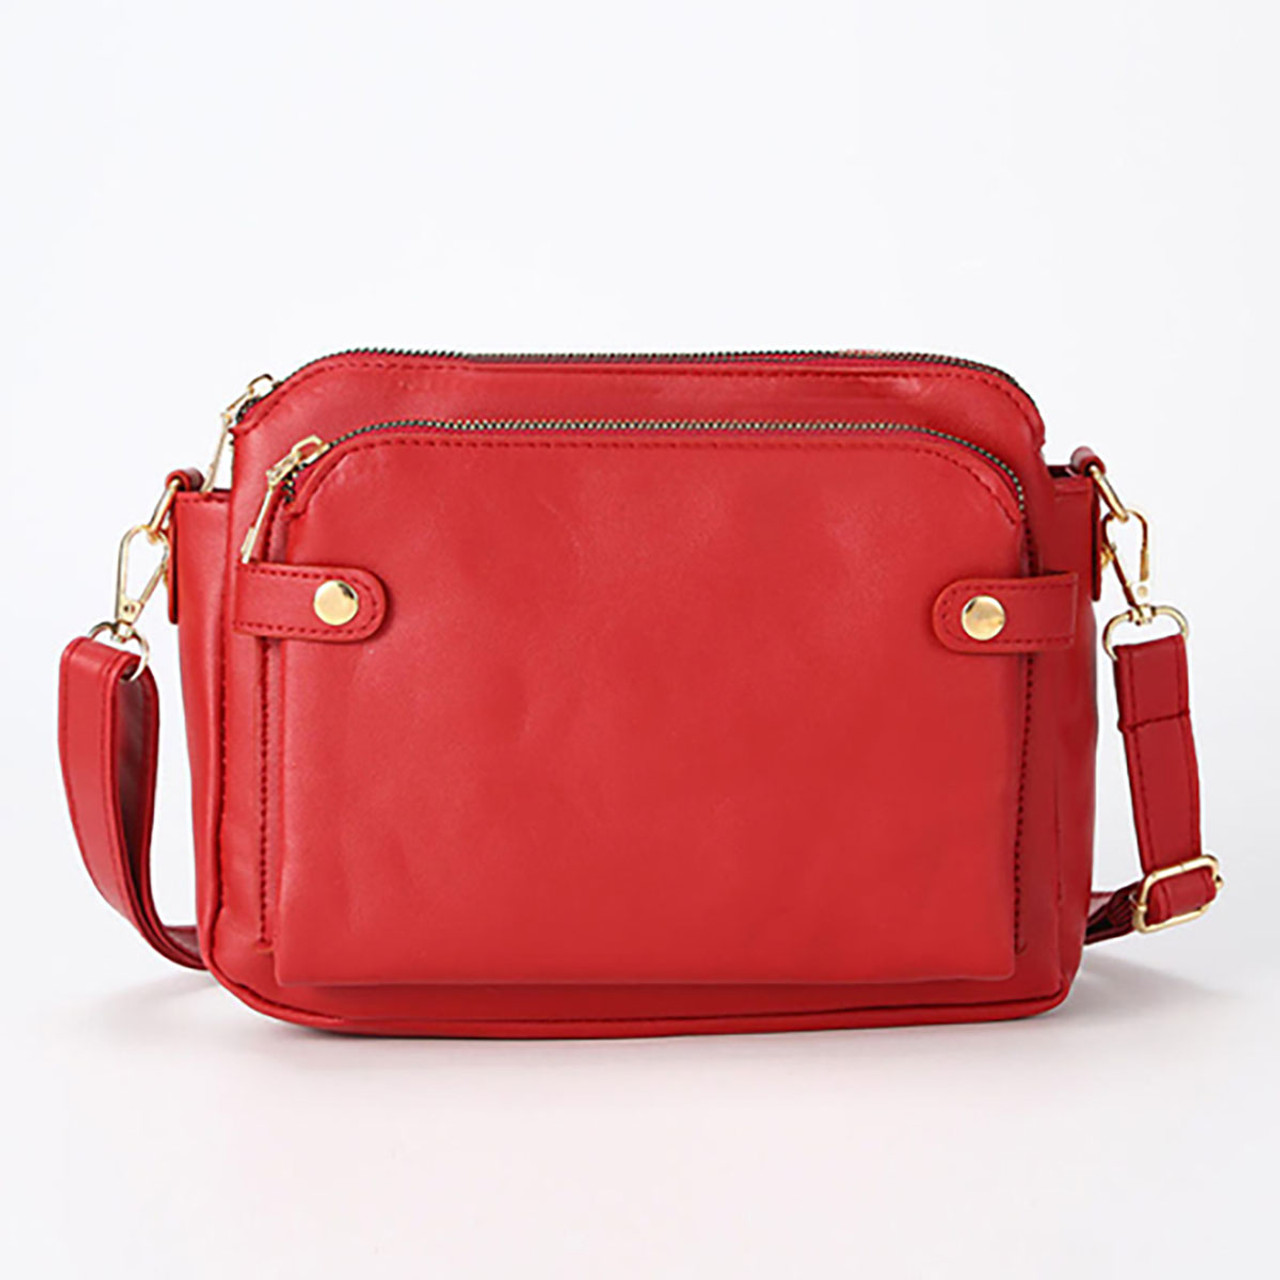 Crossbody Leather Shoulder Bag with Removable Strap product image